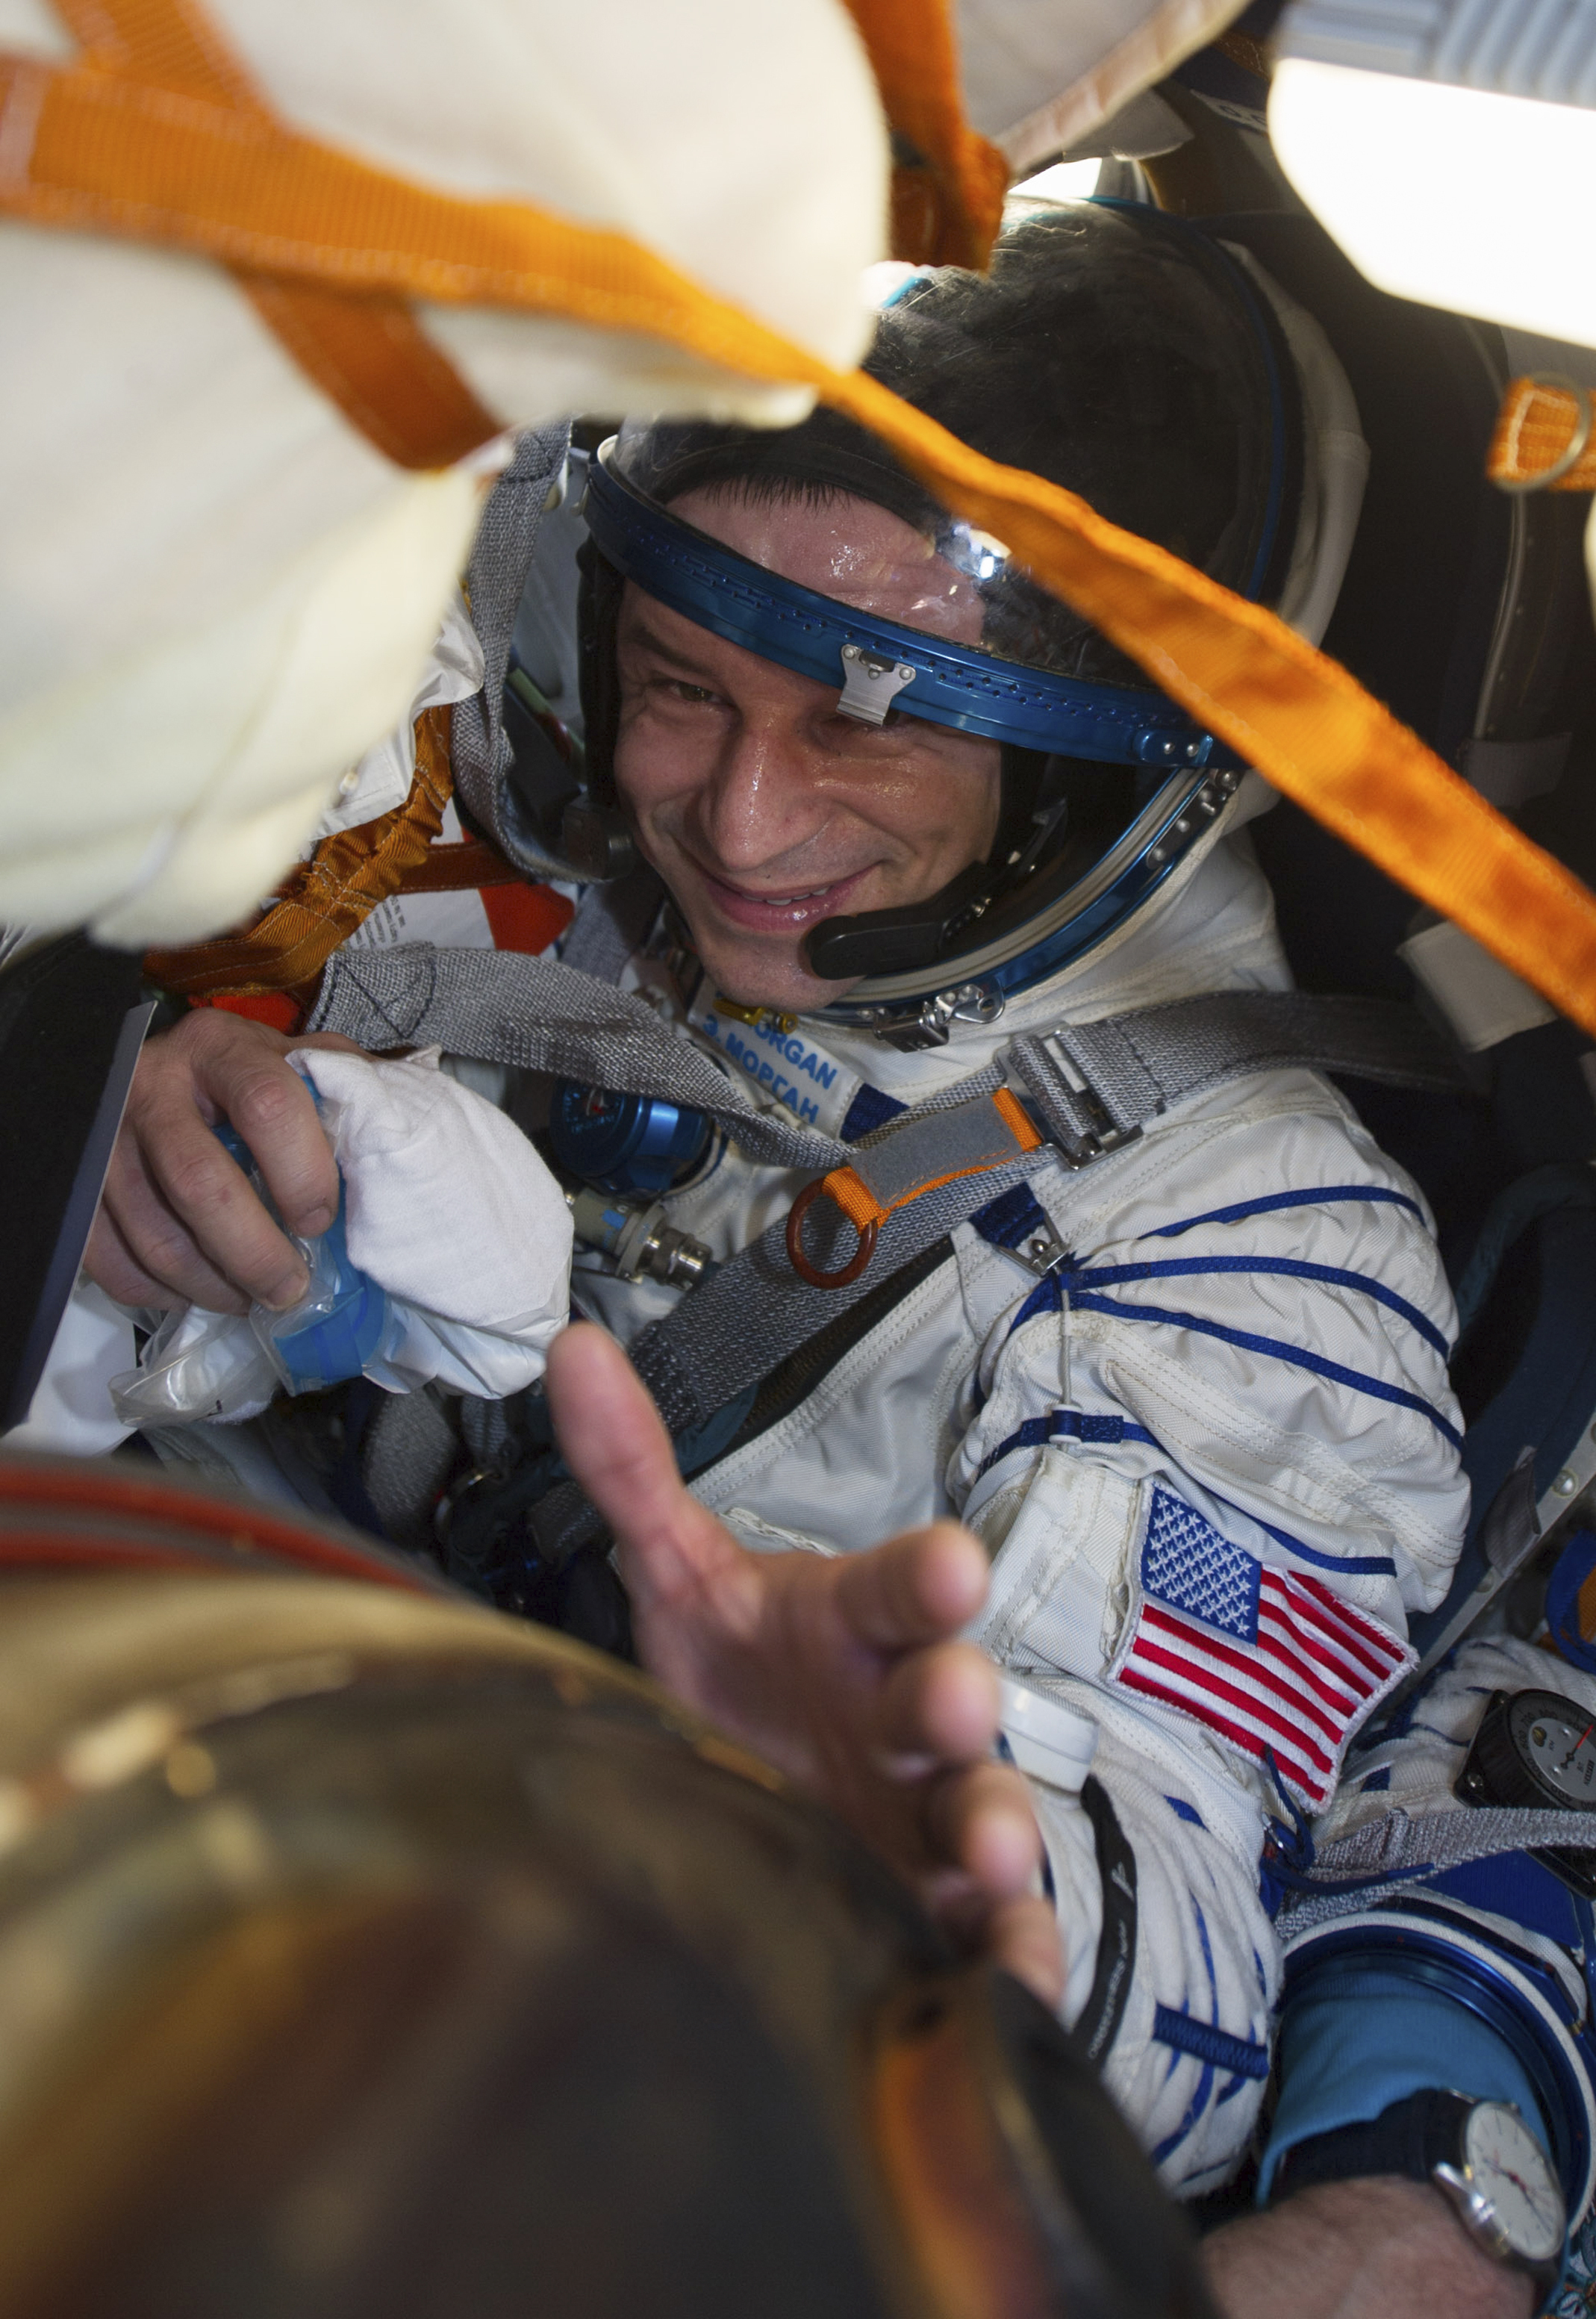 US astronaut Jessica Meir sits in the capsule shortly after the landing of the Russian Soyuz MS-15 space capsule near Kazakh town of Dzhezkazgan, Kazakhstan, on Friday.